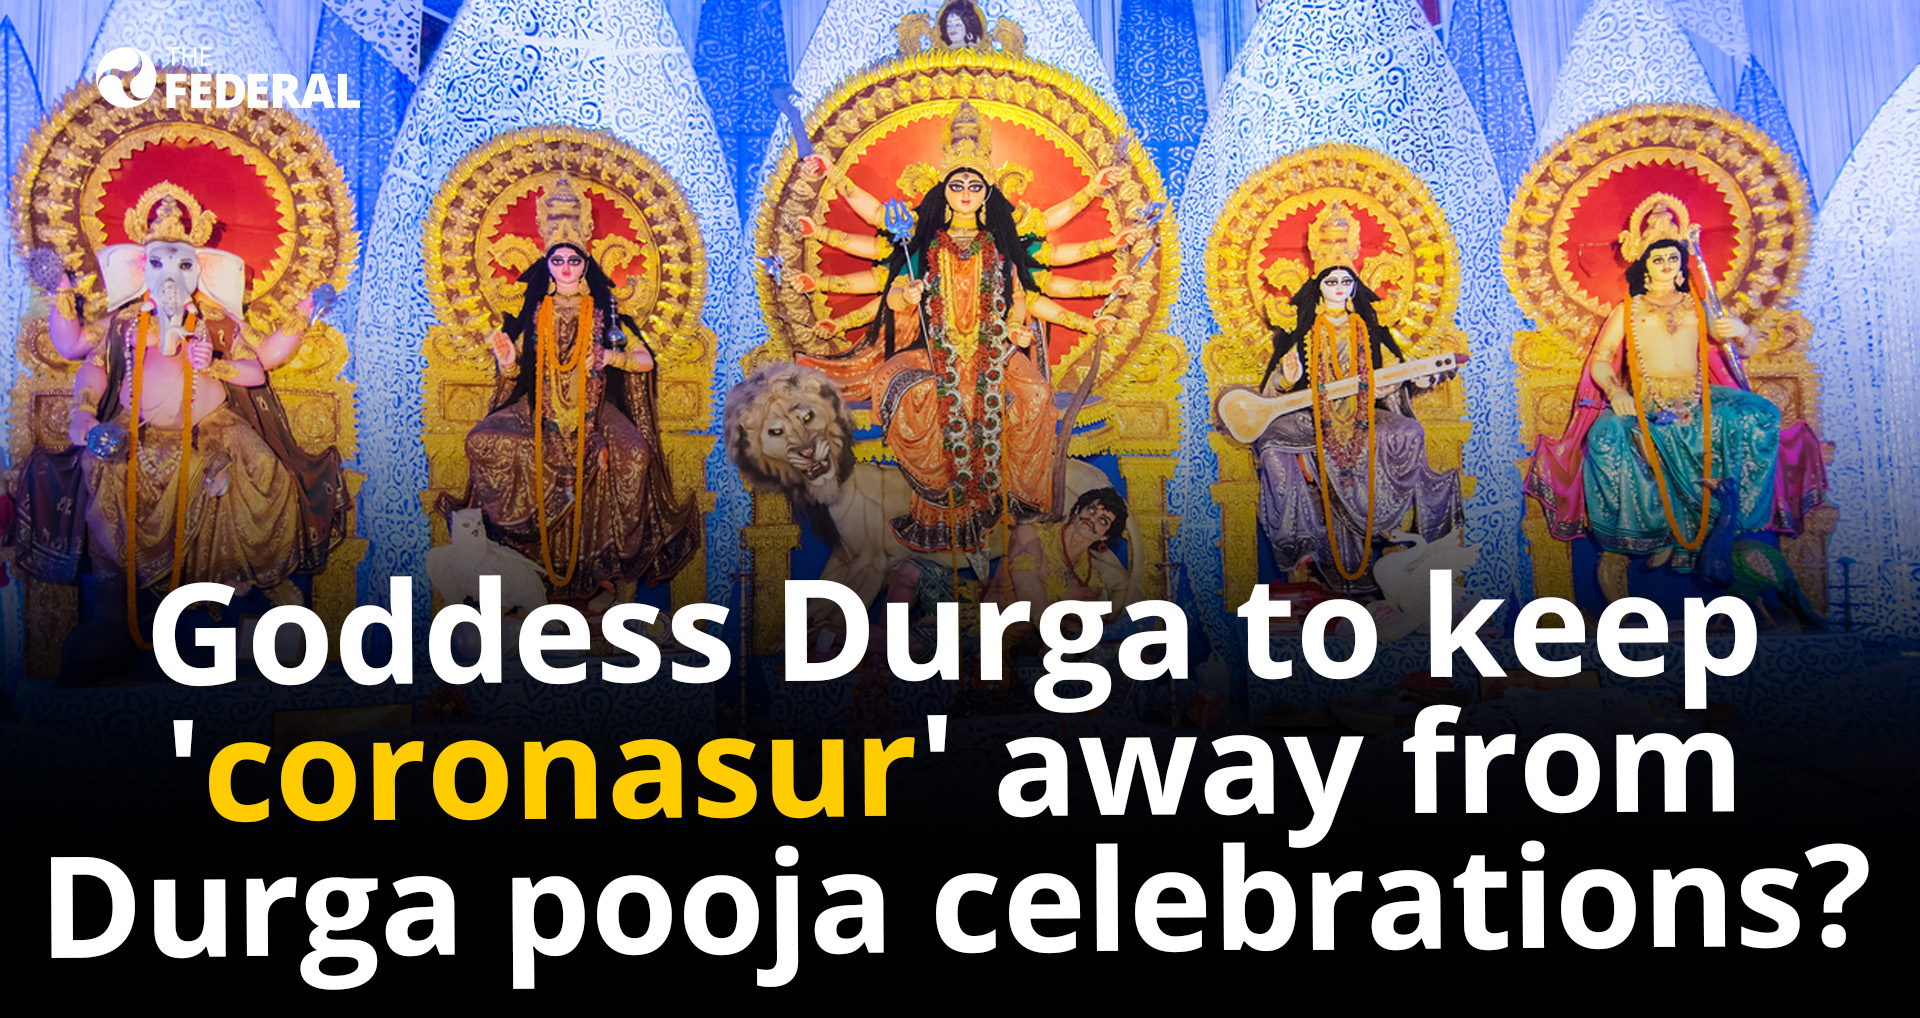 Kolkata gears up for Durga pooja, examines ways to have open pandals